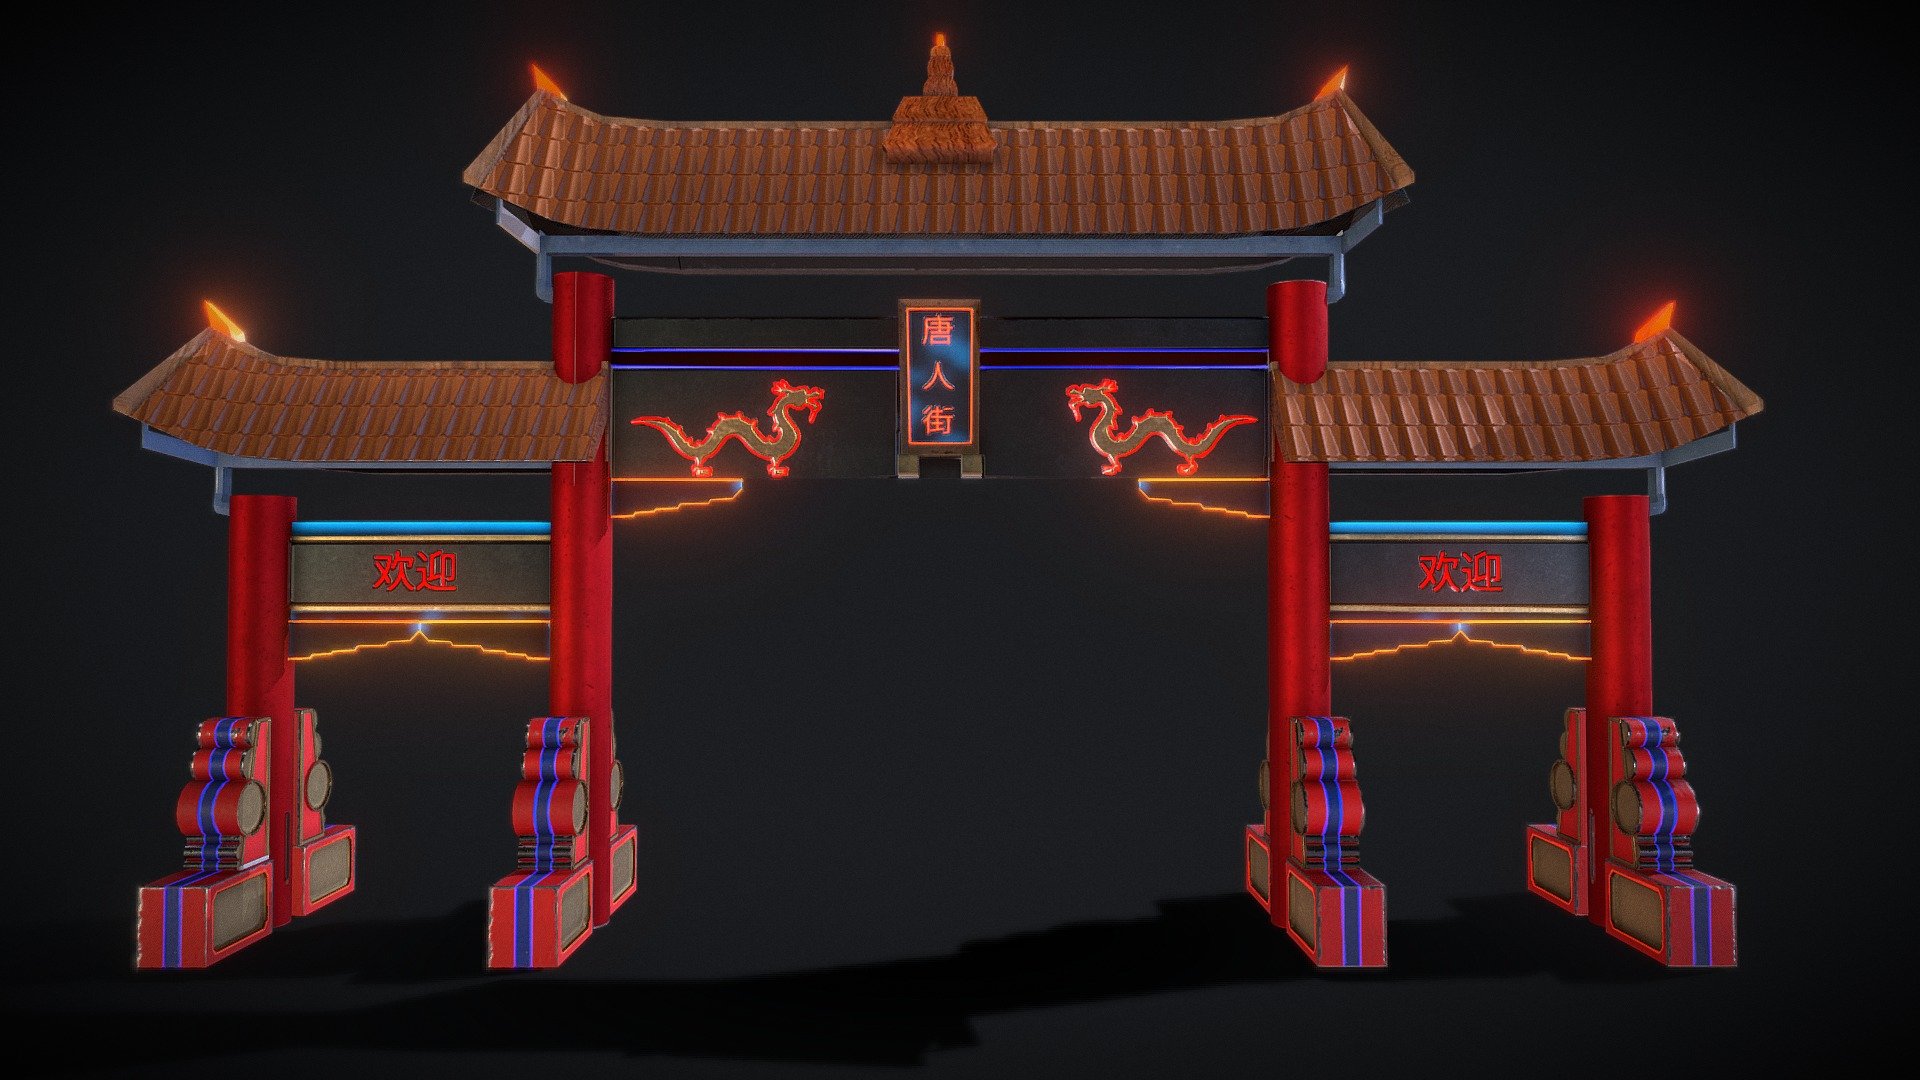 *Hello! *

This is one of the environment that i've built for the game that I help develop called Decimate. This is the Market Entrance on the game. For this Environment Piece, I wanted to mix some of the tradicional aspects of a tradicional Torii gate with some touches of cyberpunk on it.

Decimate is a TPS Hack and Slash with bullet hell elements where a girl named Elahni is trying to escape a Cyberpunk Superhuman dystopian society by stealing their powers 3d model